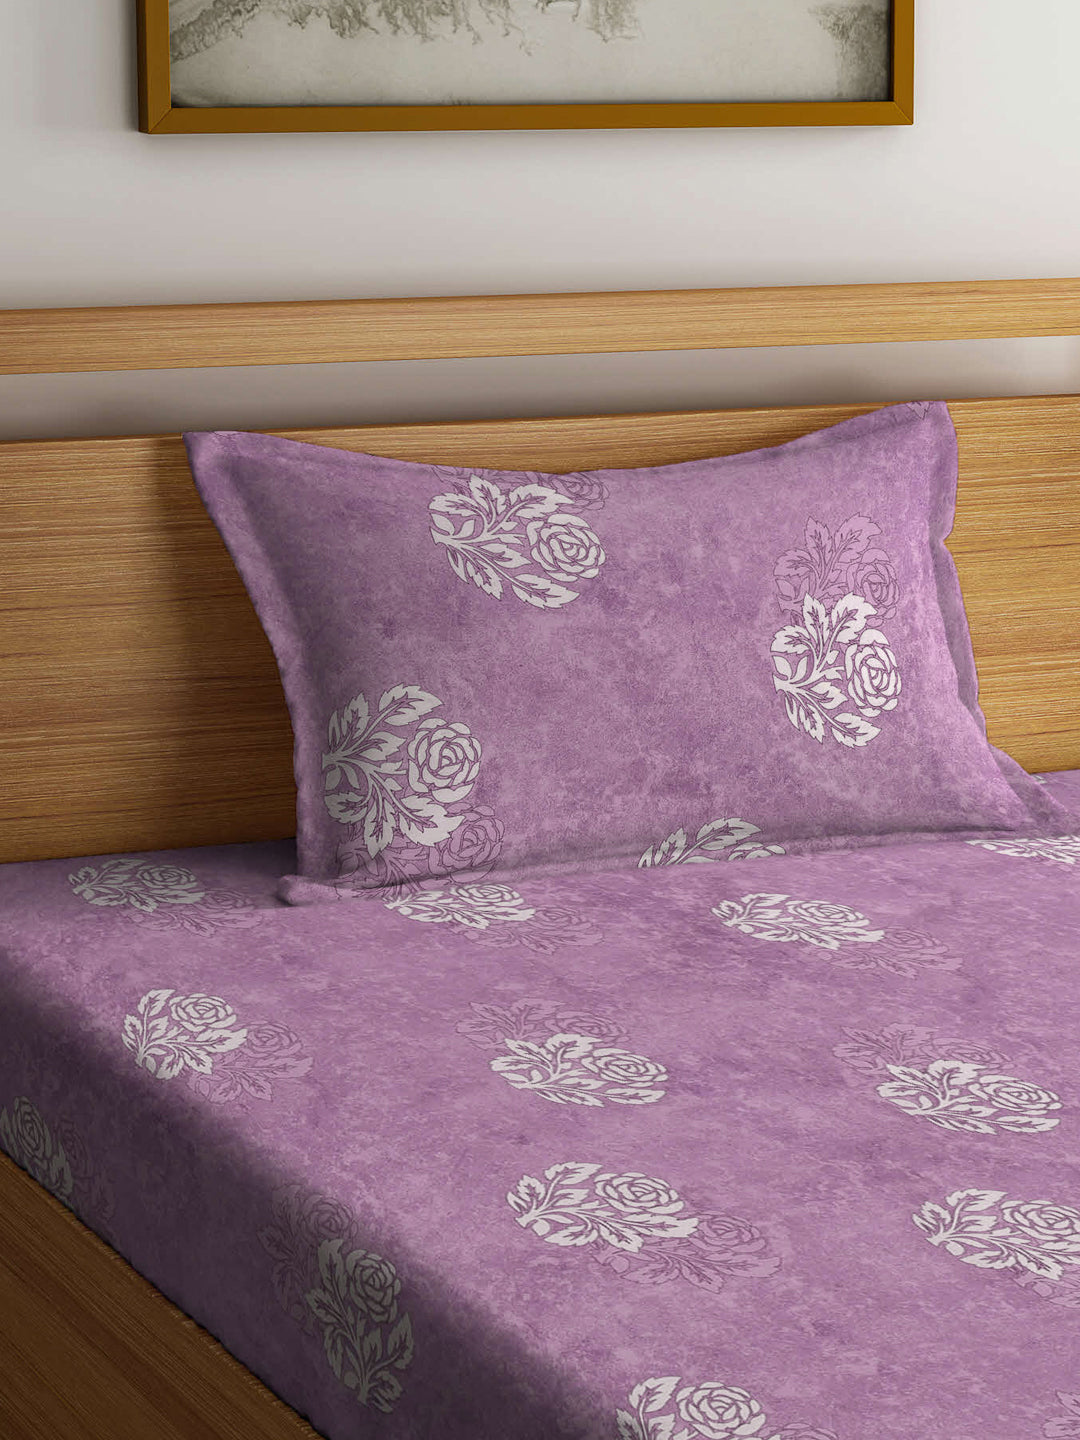 Klotthe Purple Floral 400 TC Pure Cotton Fitted Single Bedsheet Set in Book Fold Packing